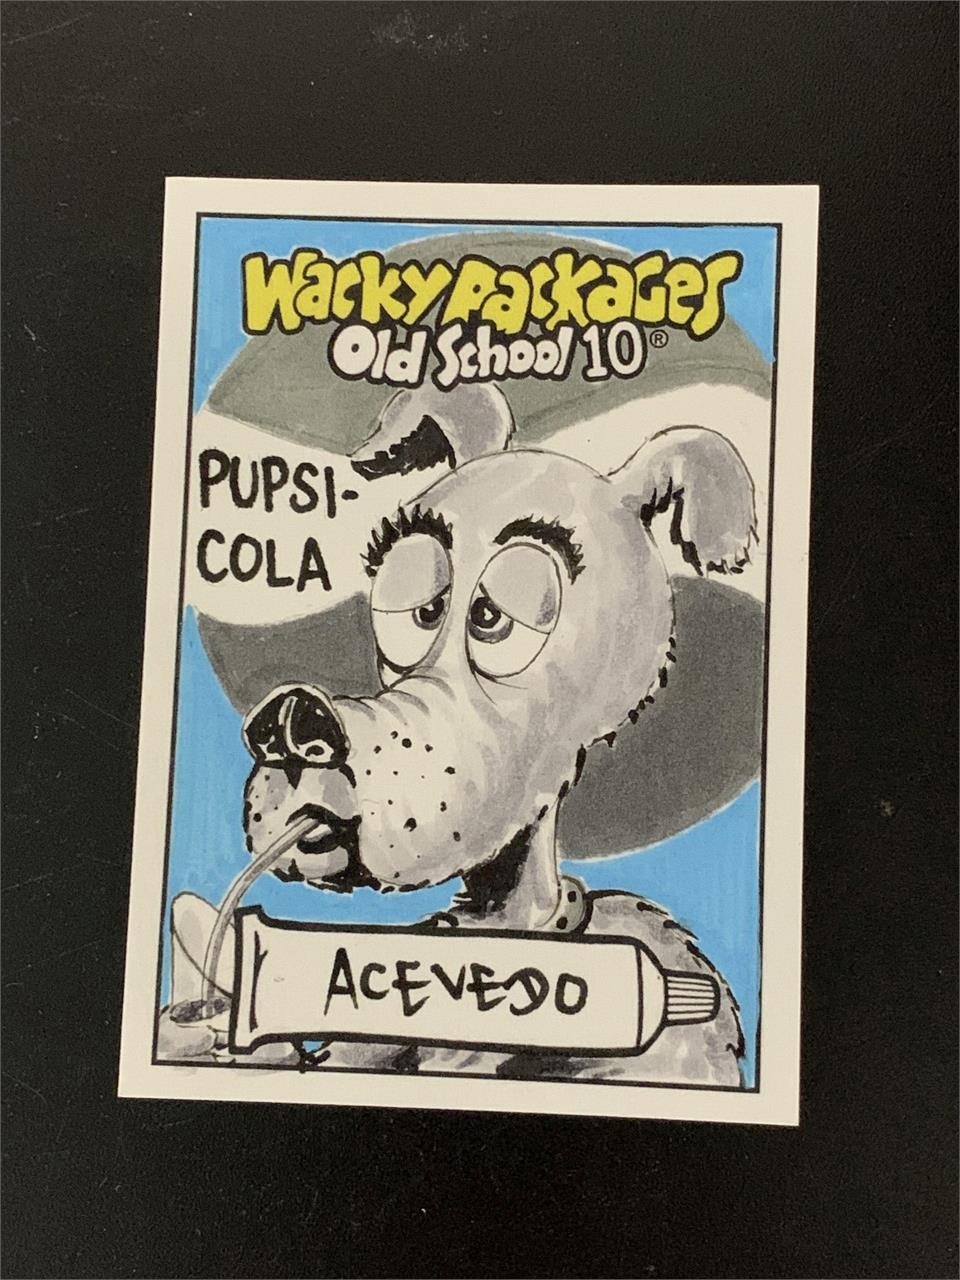 2021 Topps Wacky Packages OLDS10 Old School 10 Pup